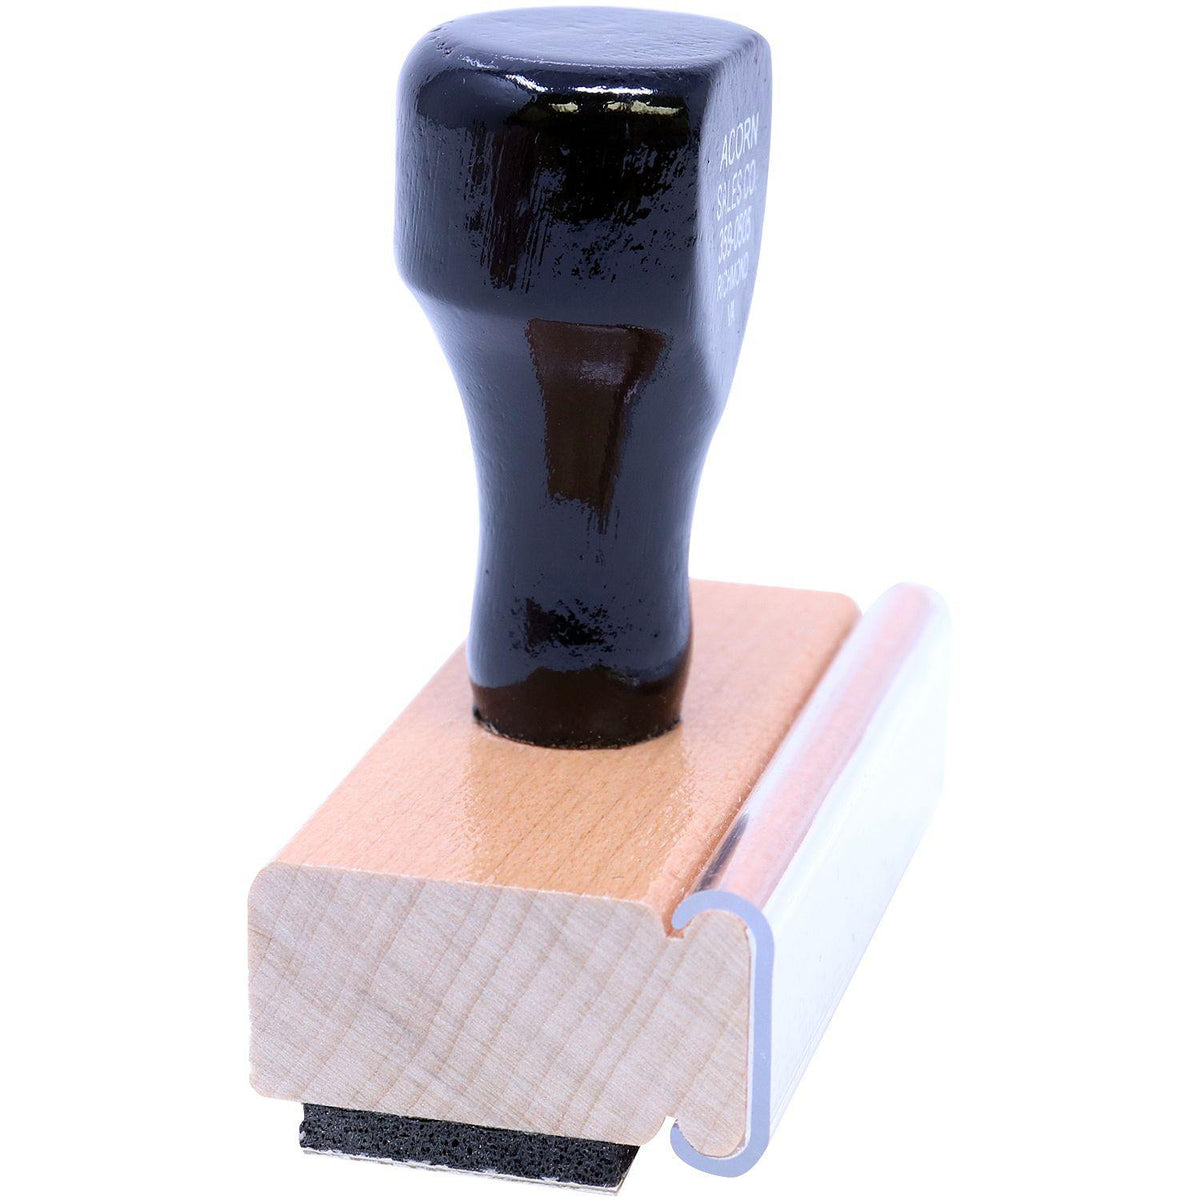 Side View of Bold Distributed Rubber Stamp at an Angle